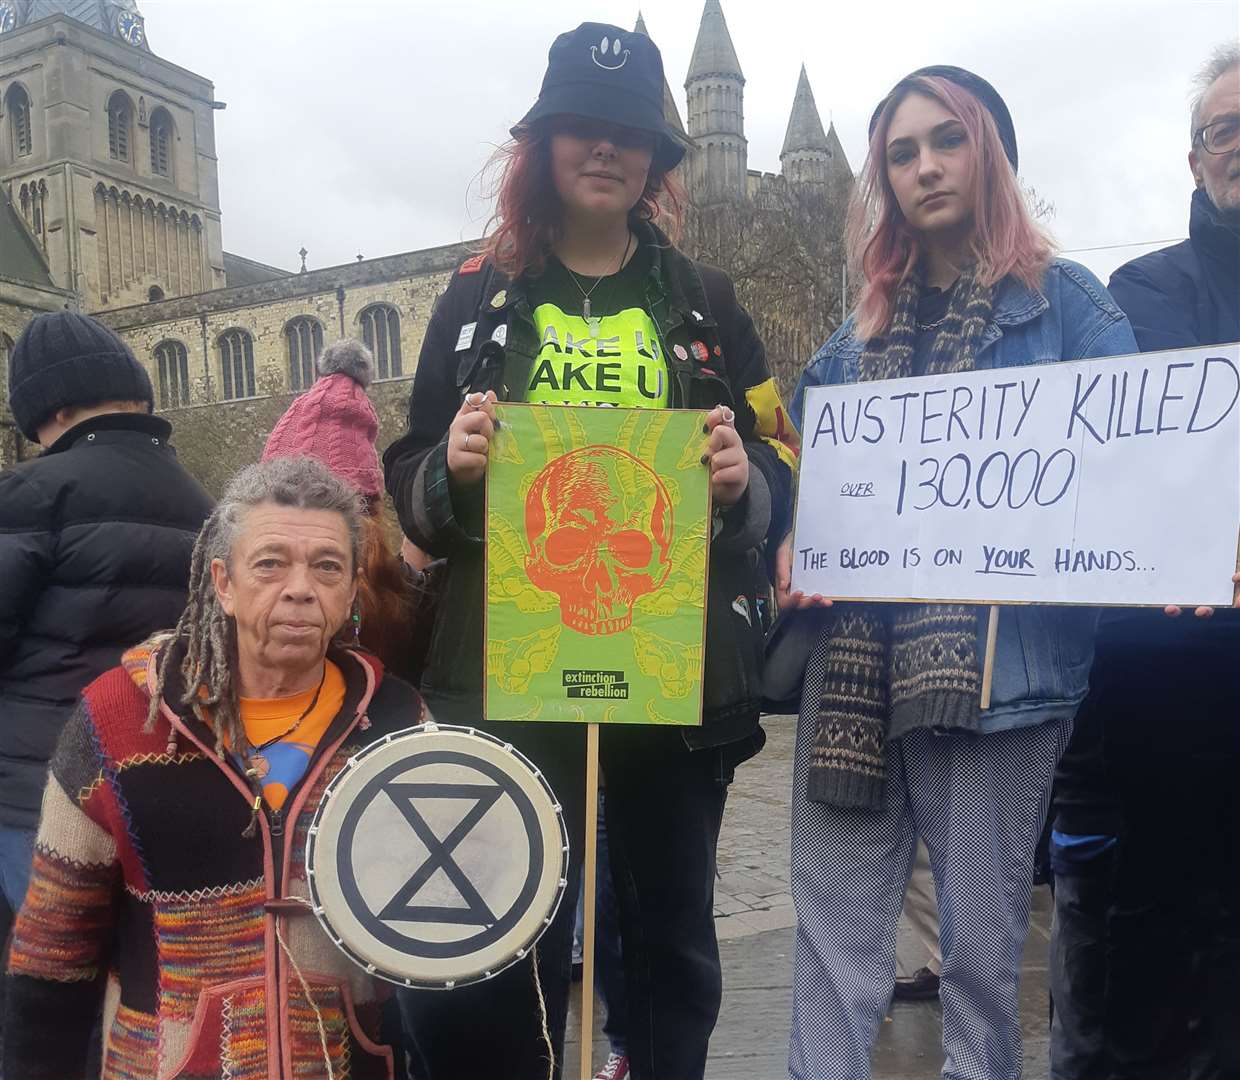 Extinction rebellion were also present and not happy about Boris' visit